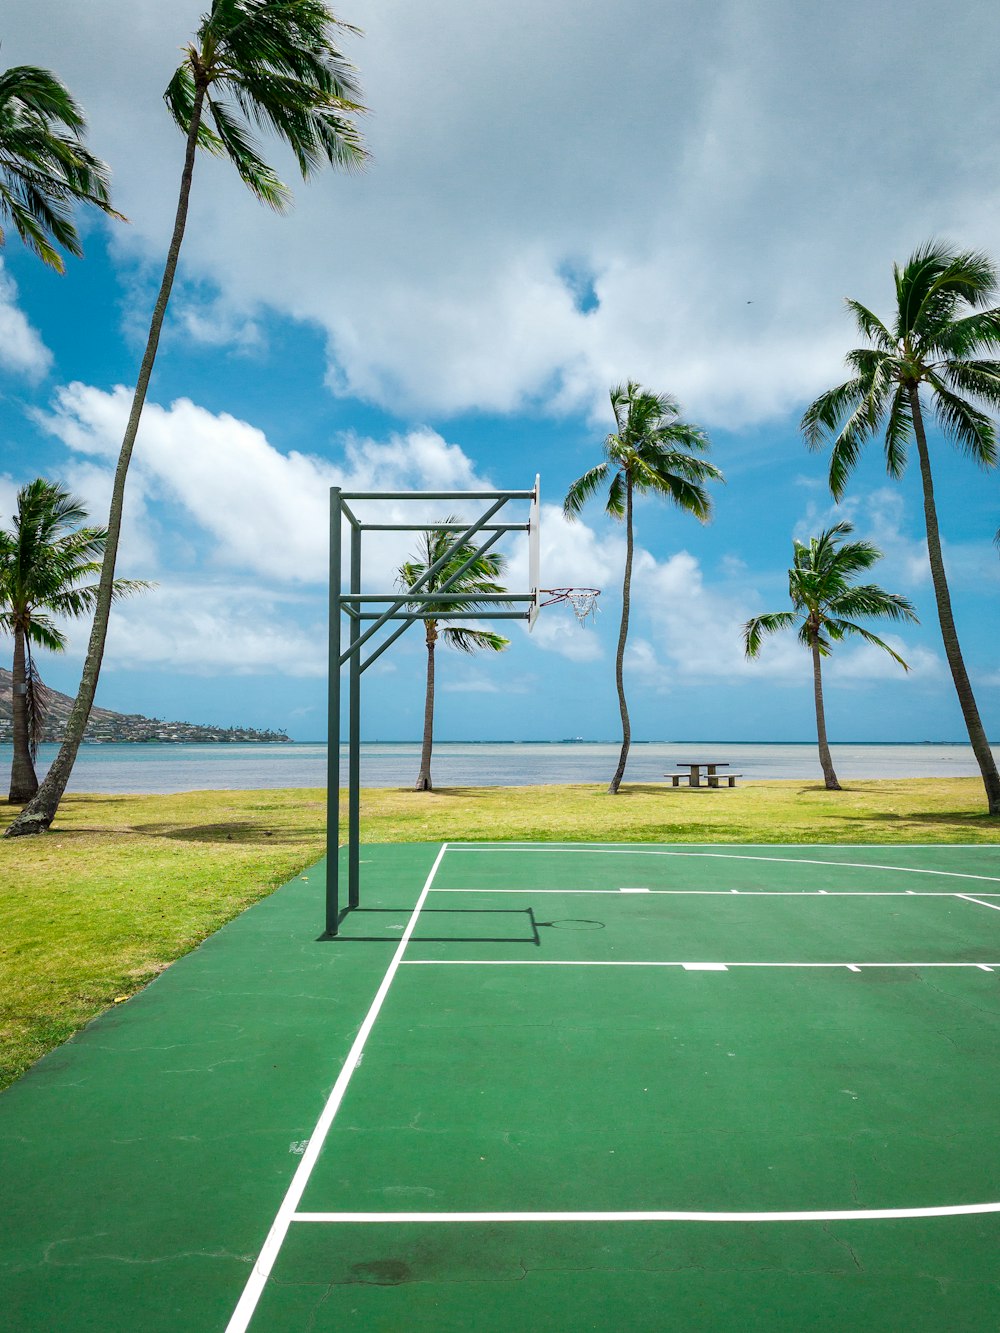 a tennis court with a basketball hoop and palm trees